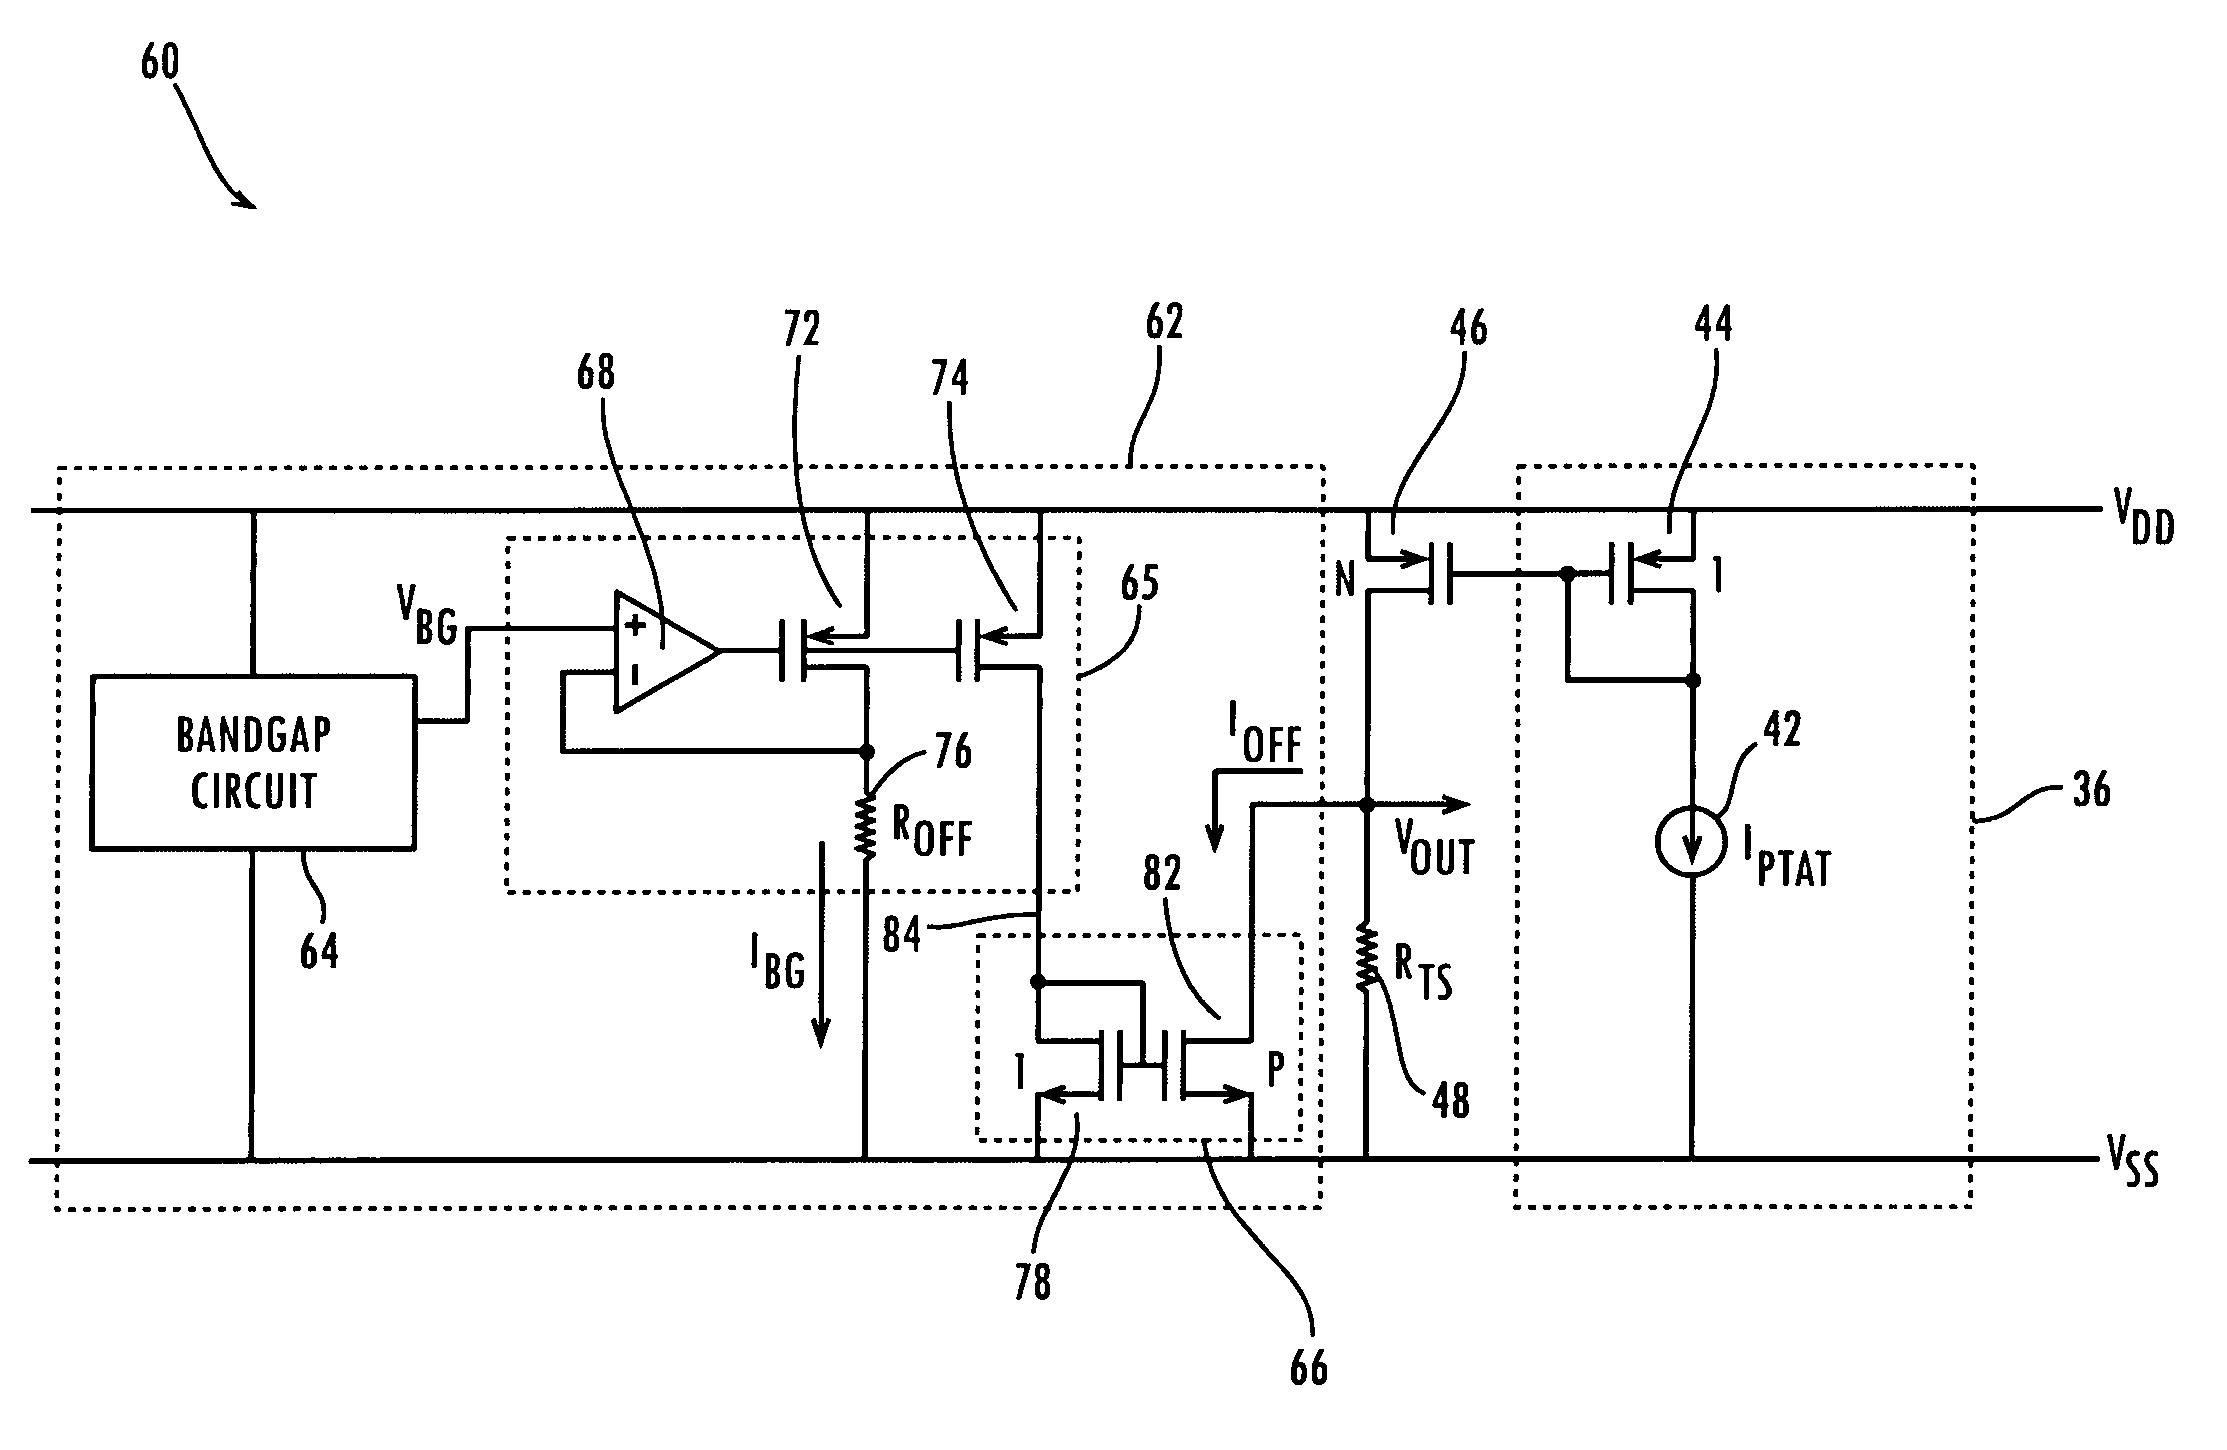 Linear integrated circuit temperature sensor apparatus with adjustable gain and offset